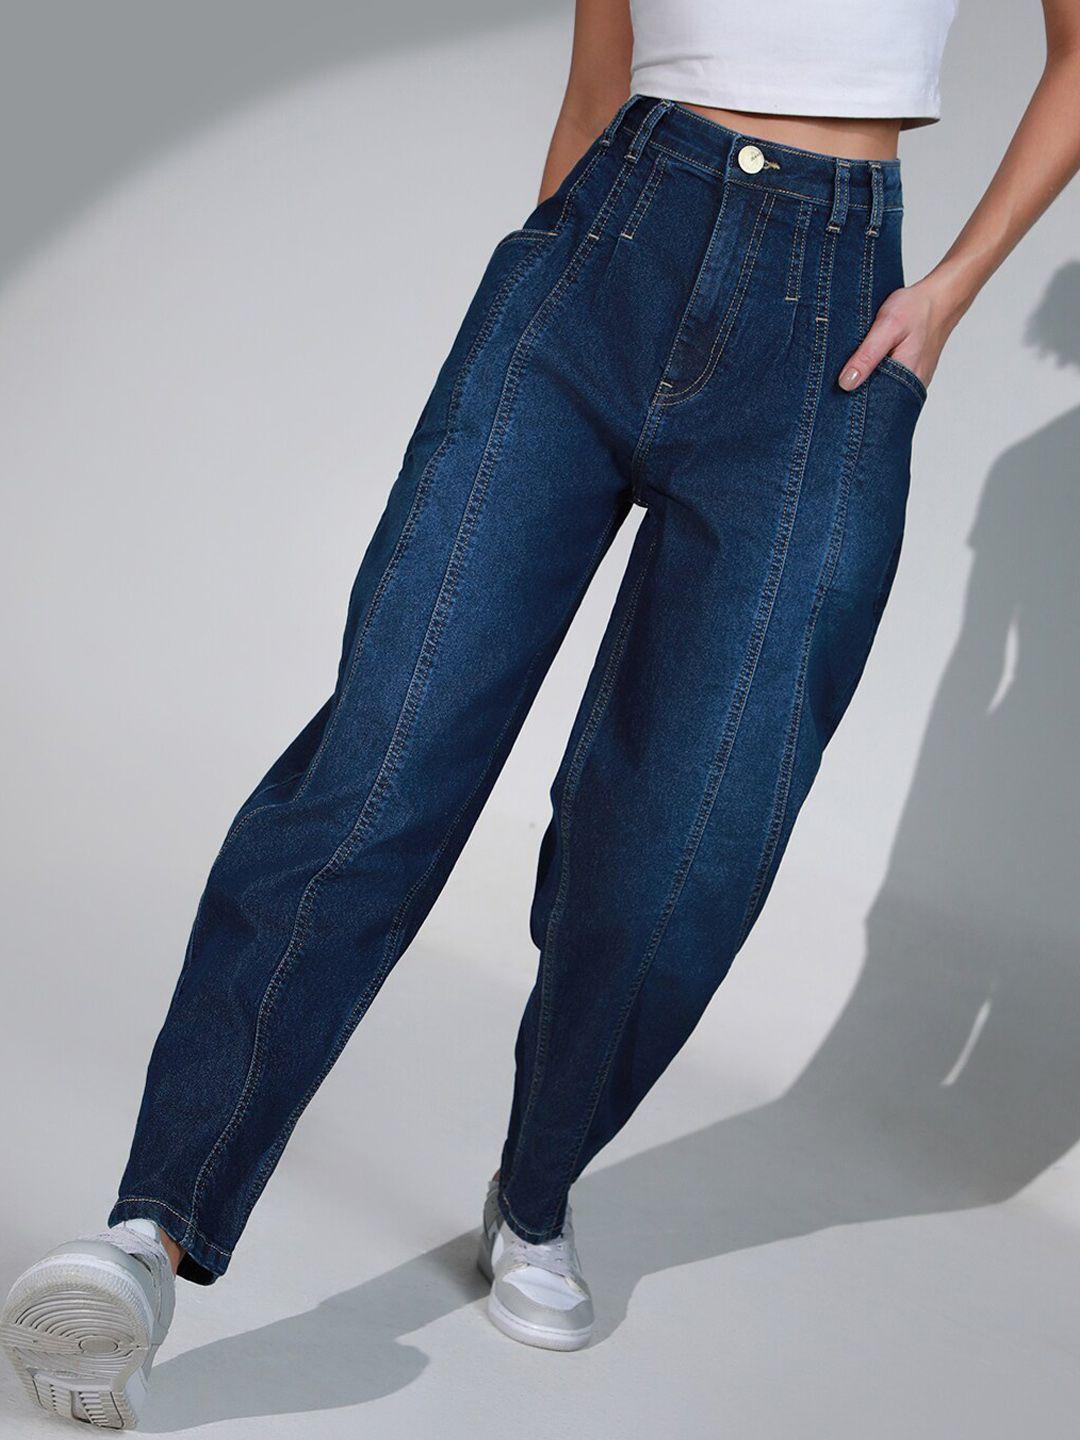 hubberholme-women-slouchy-fit-high-rise-clean-look-stretchable-jeans